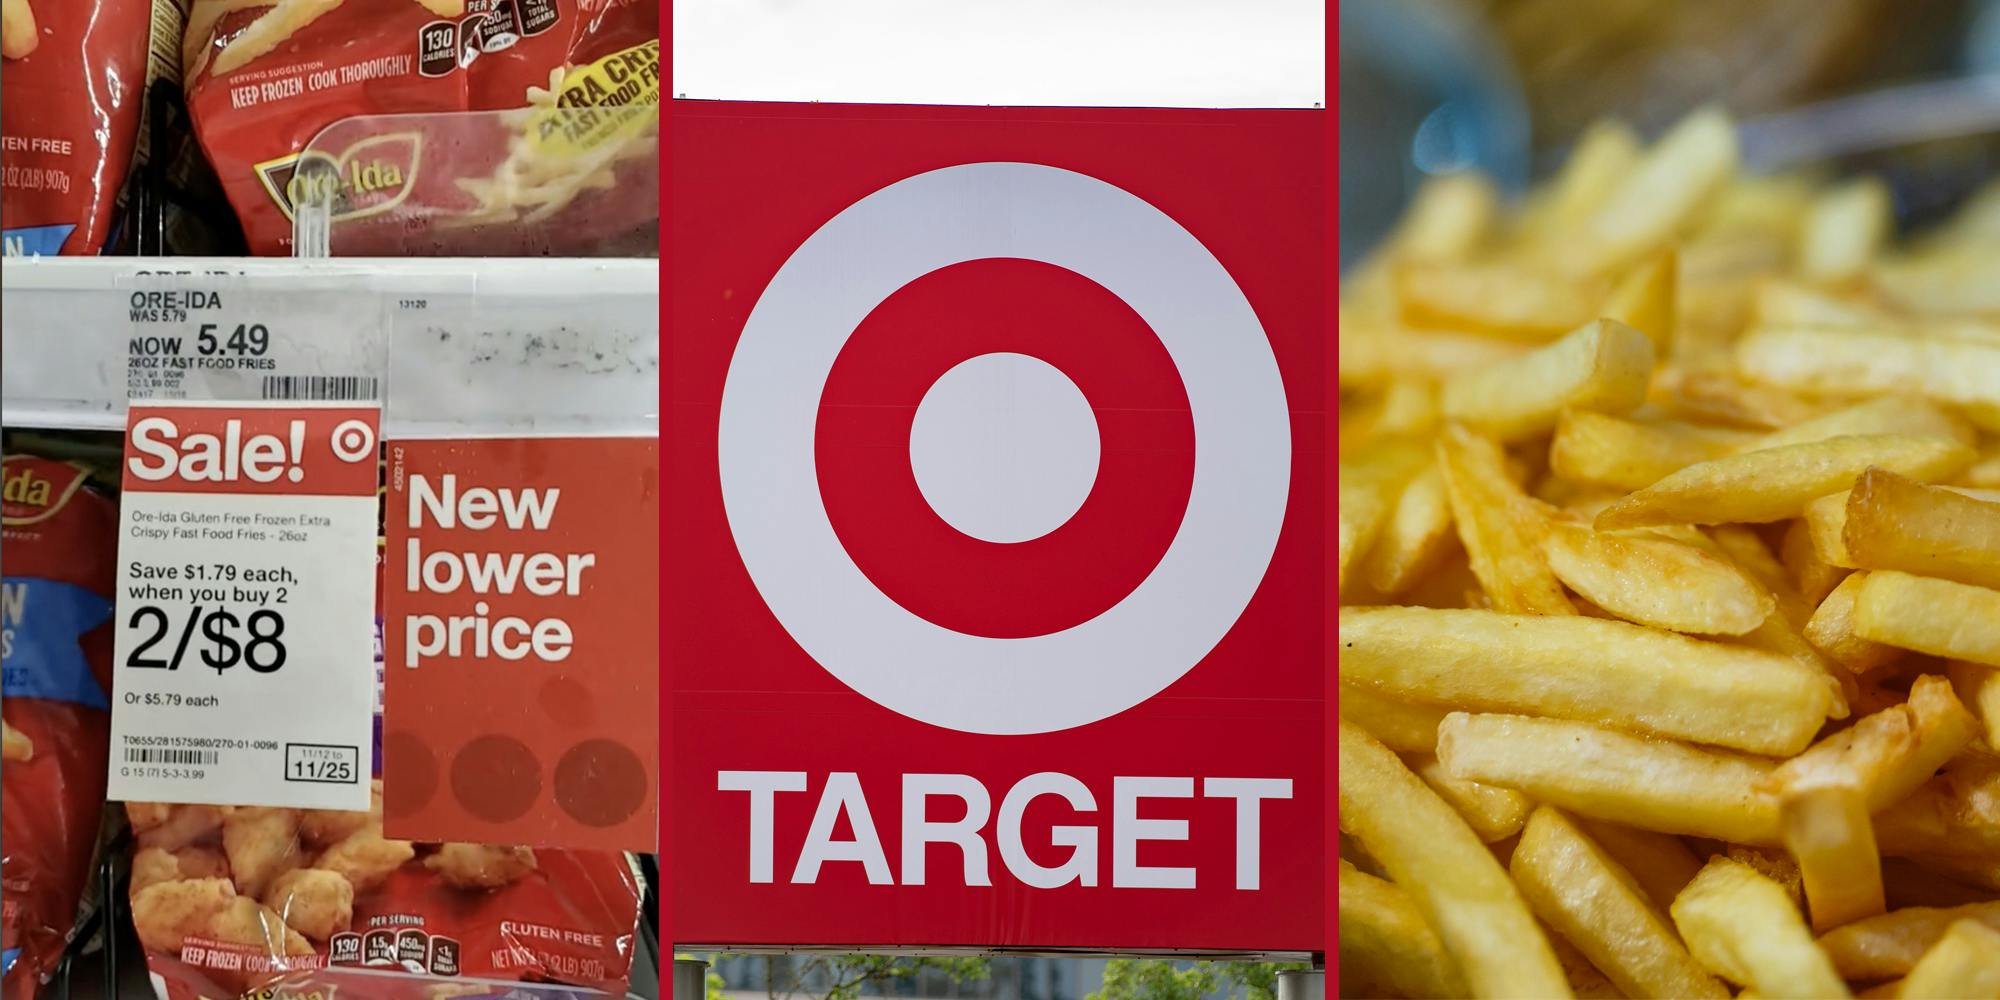 ‘I take a photo and I make them price match. I don’t have time for the games’: Shopper accuses Target of ‘shady’ sale practices after doing math on ‘discounted’ fries